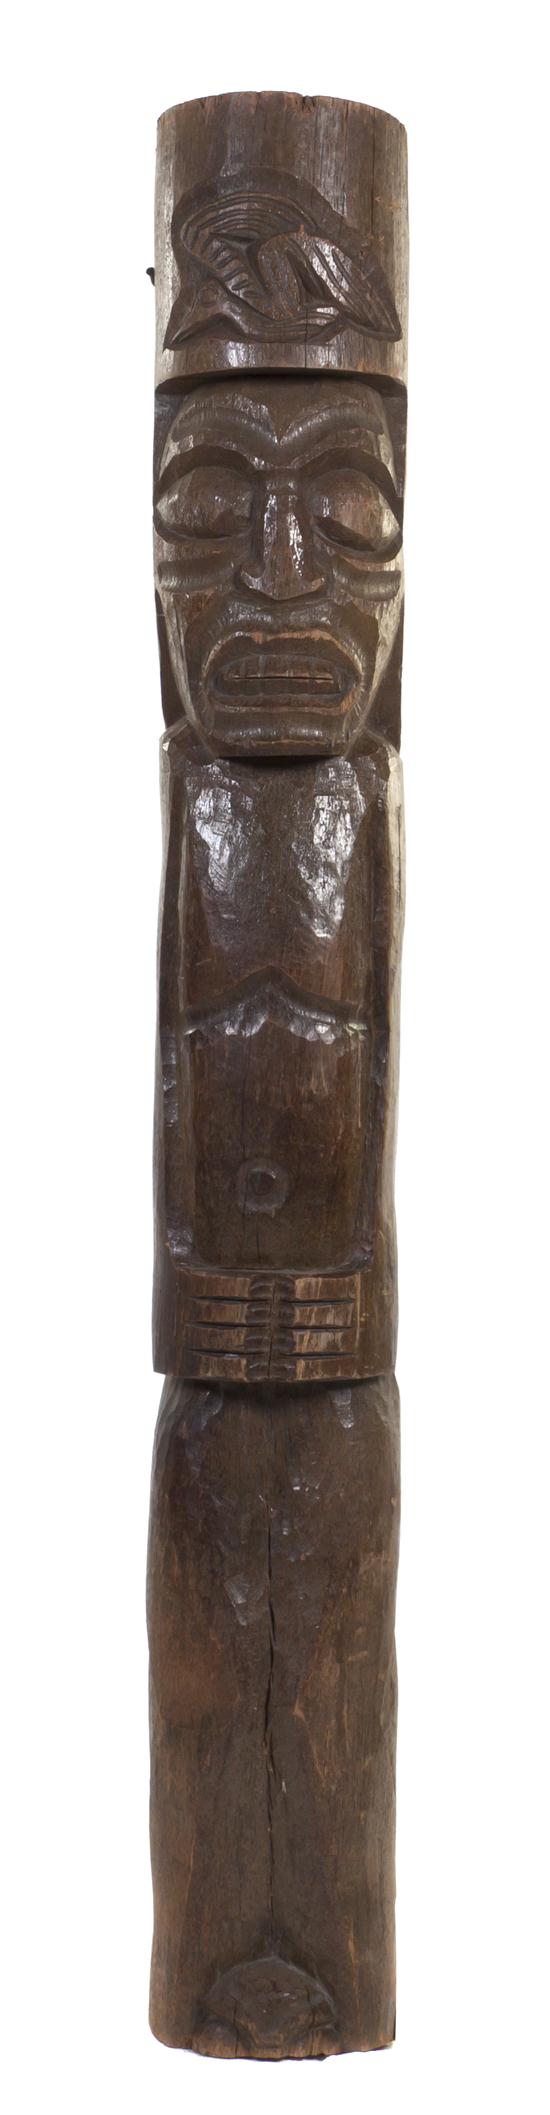 A Carved Wood Tiki Totem of cylindrical